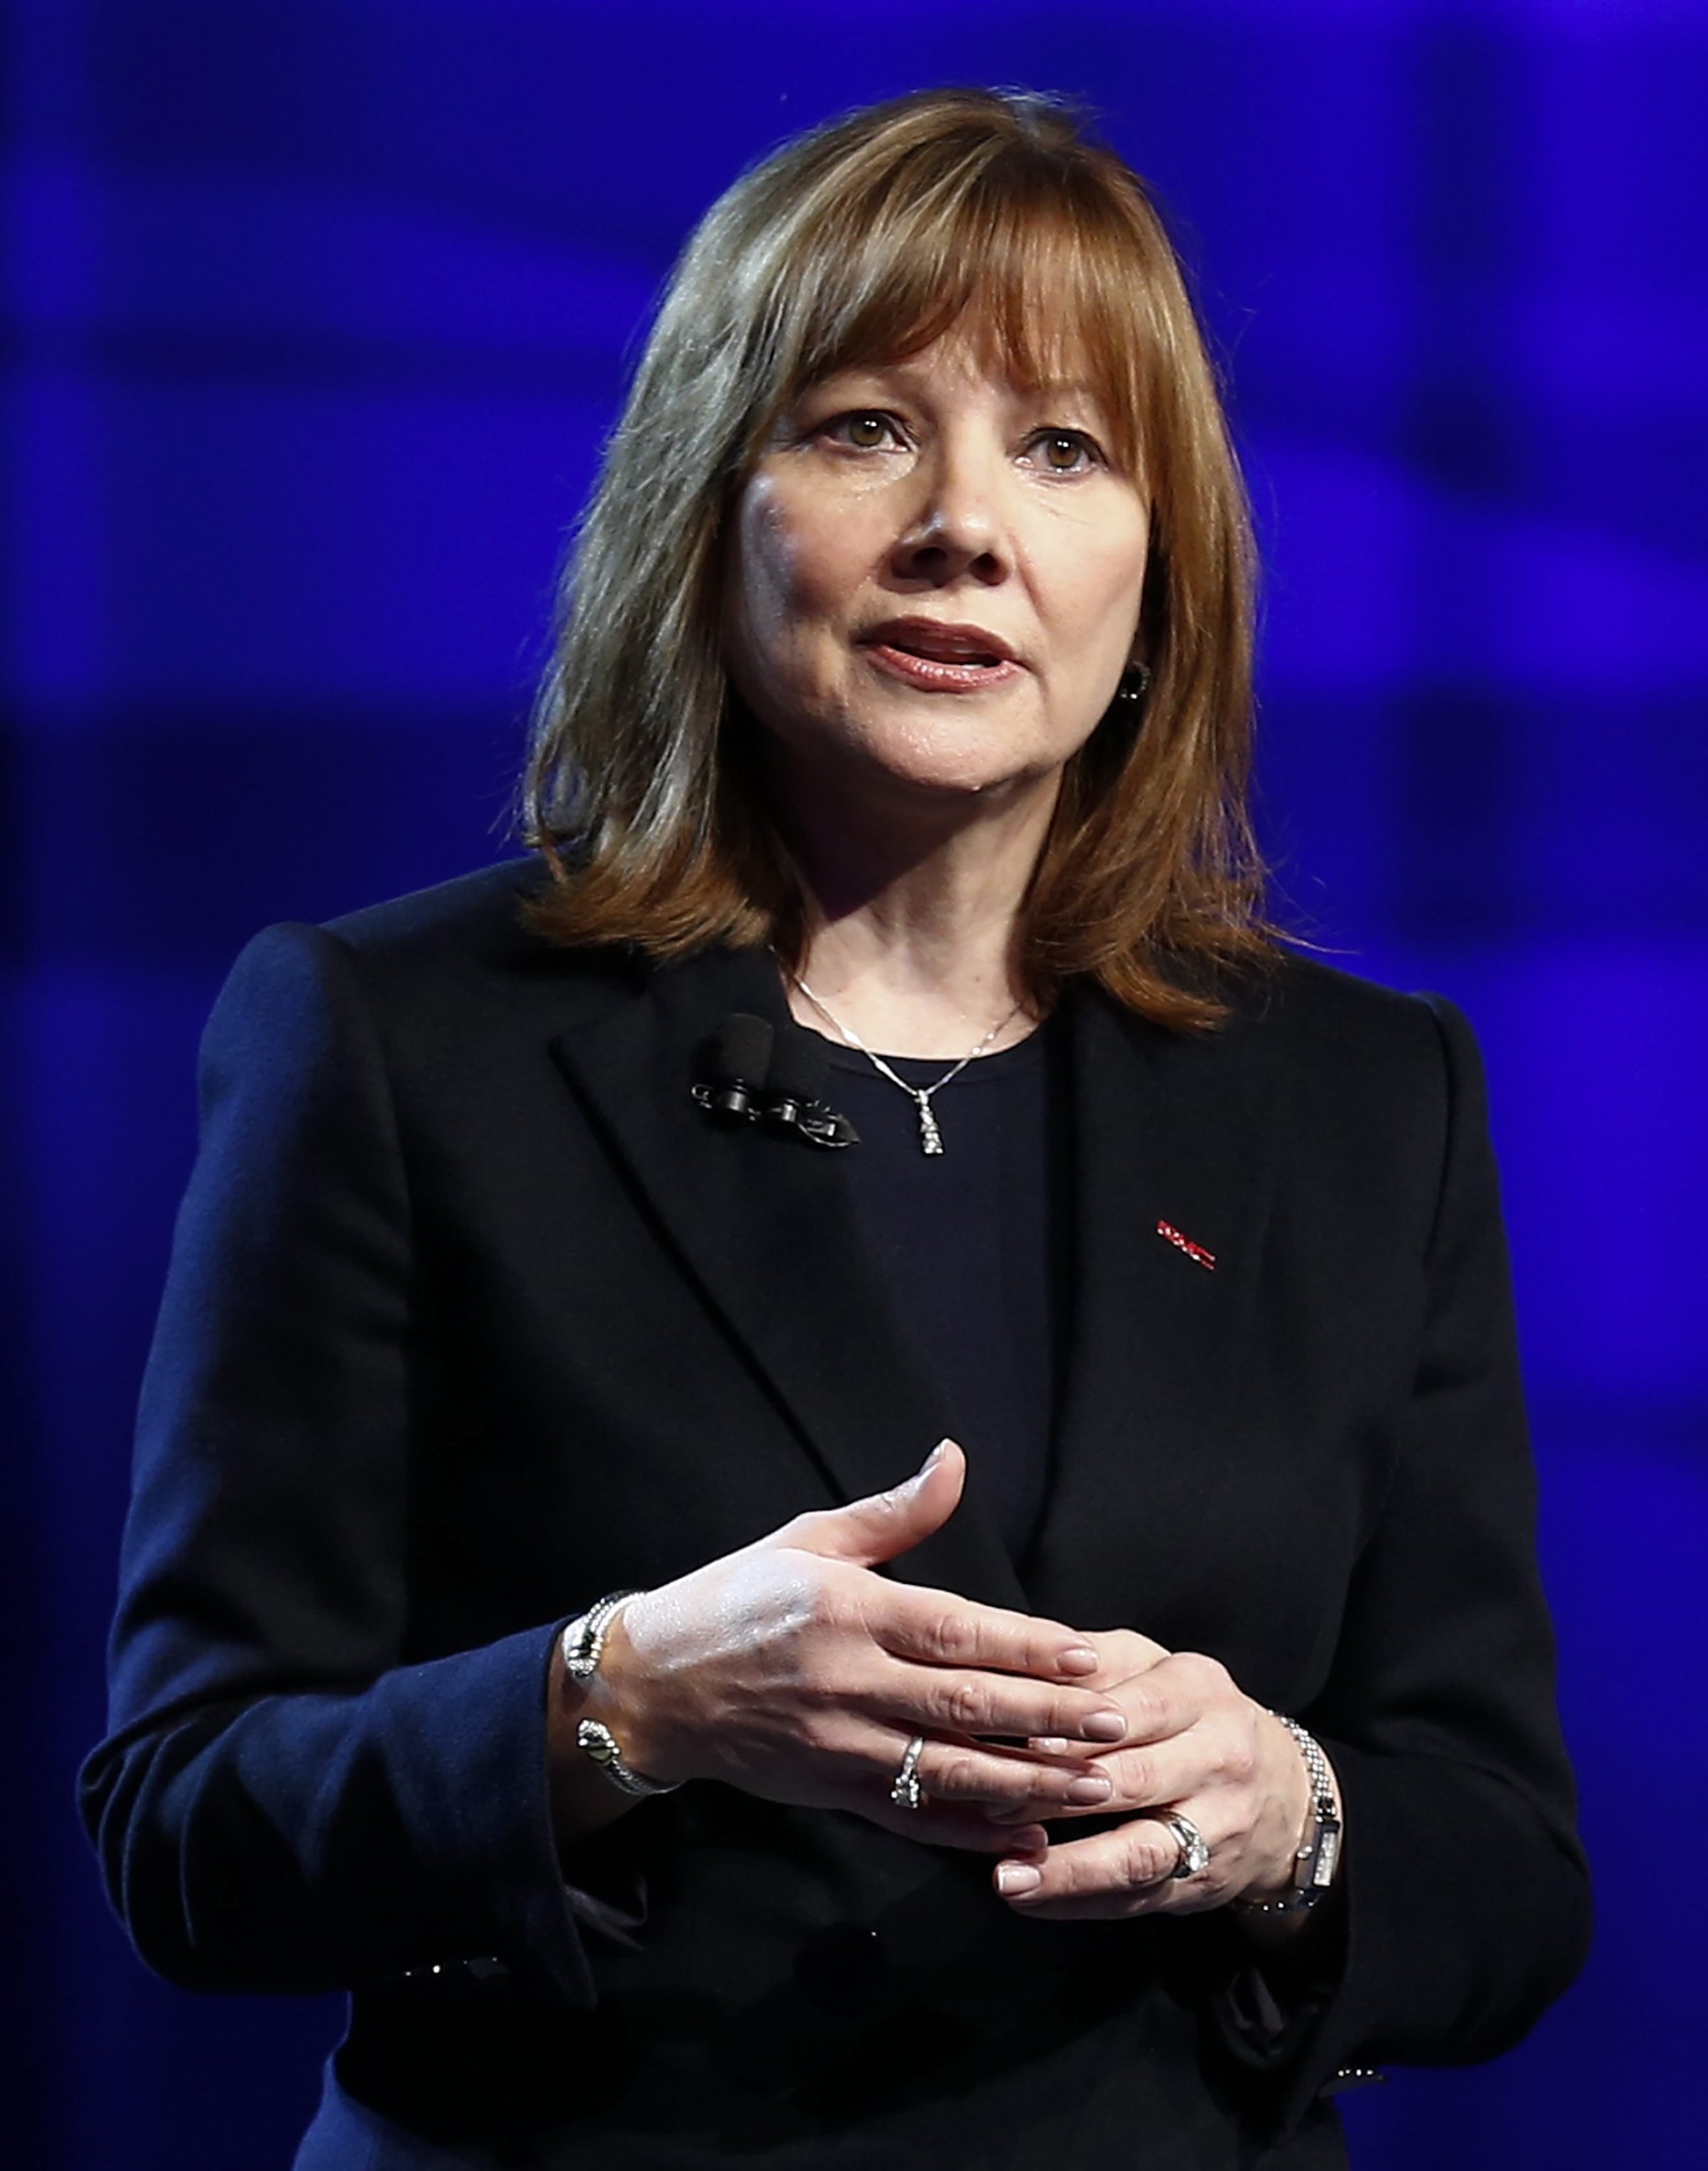 General Motors CEO Mary Barra introduces the 2015 GMC Canyon pick-up truck at the Russell Industrial Center in Detroit, on Jan. 12, 2014.